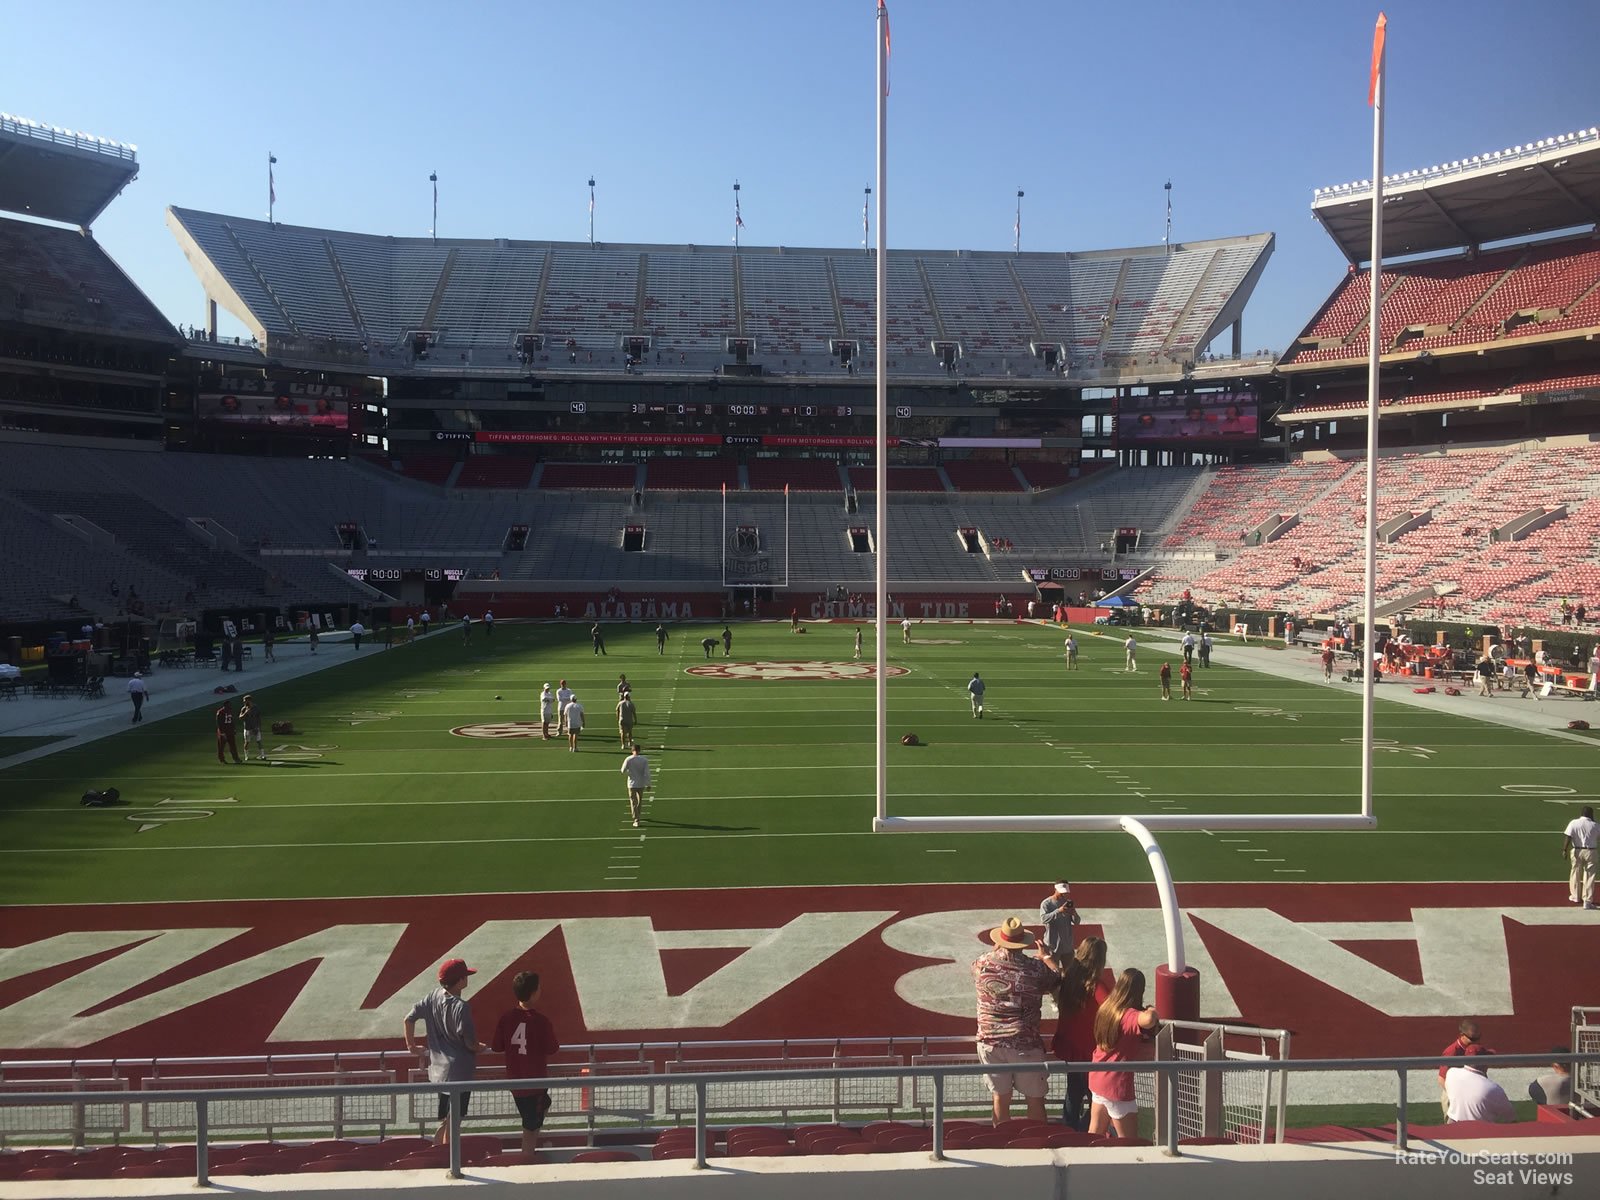 section n5, row 20 seat view  - bryant-denny stadium